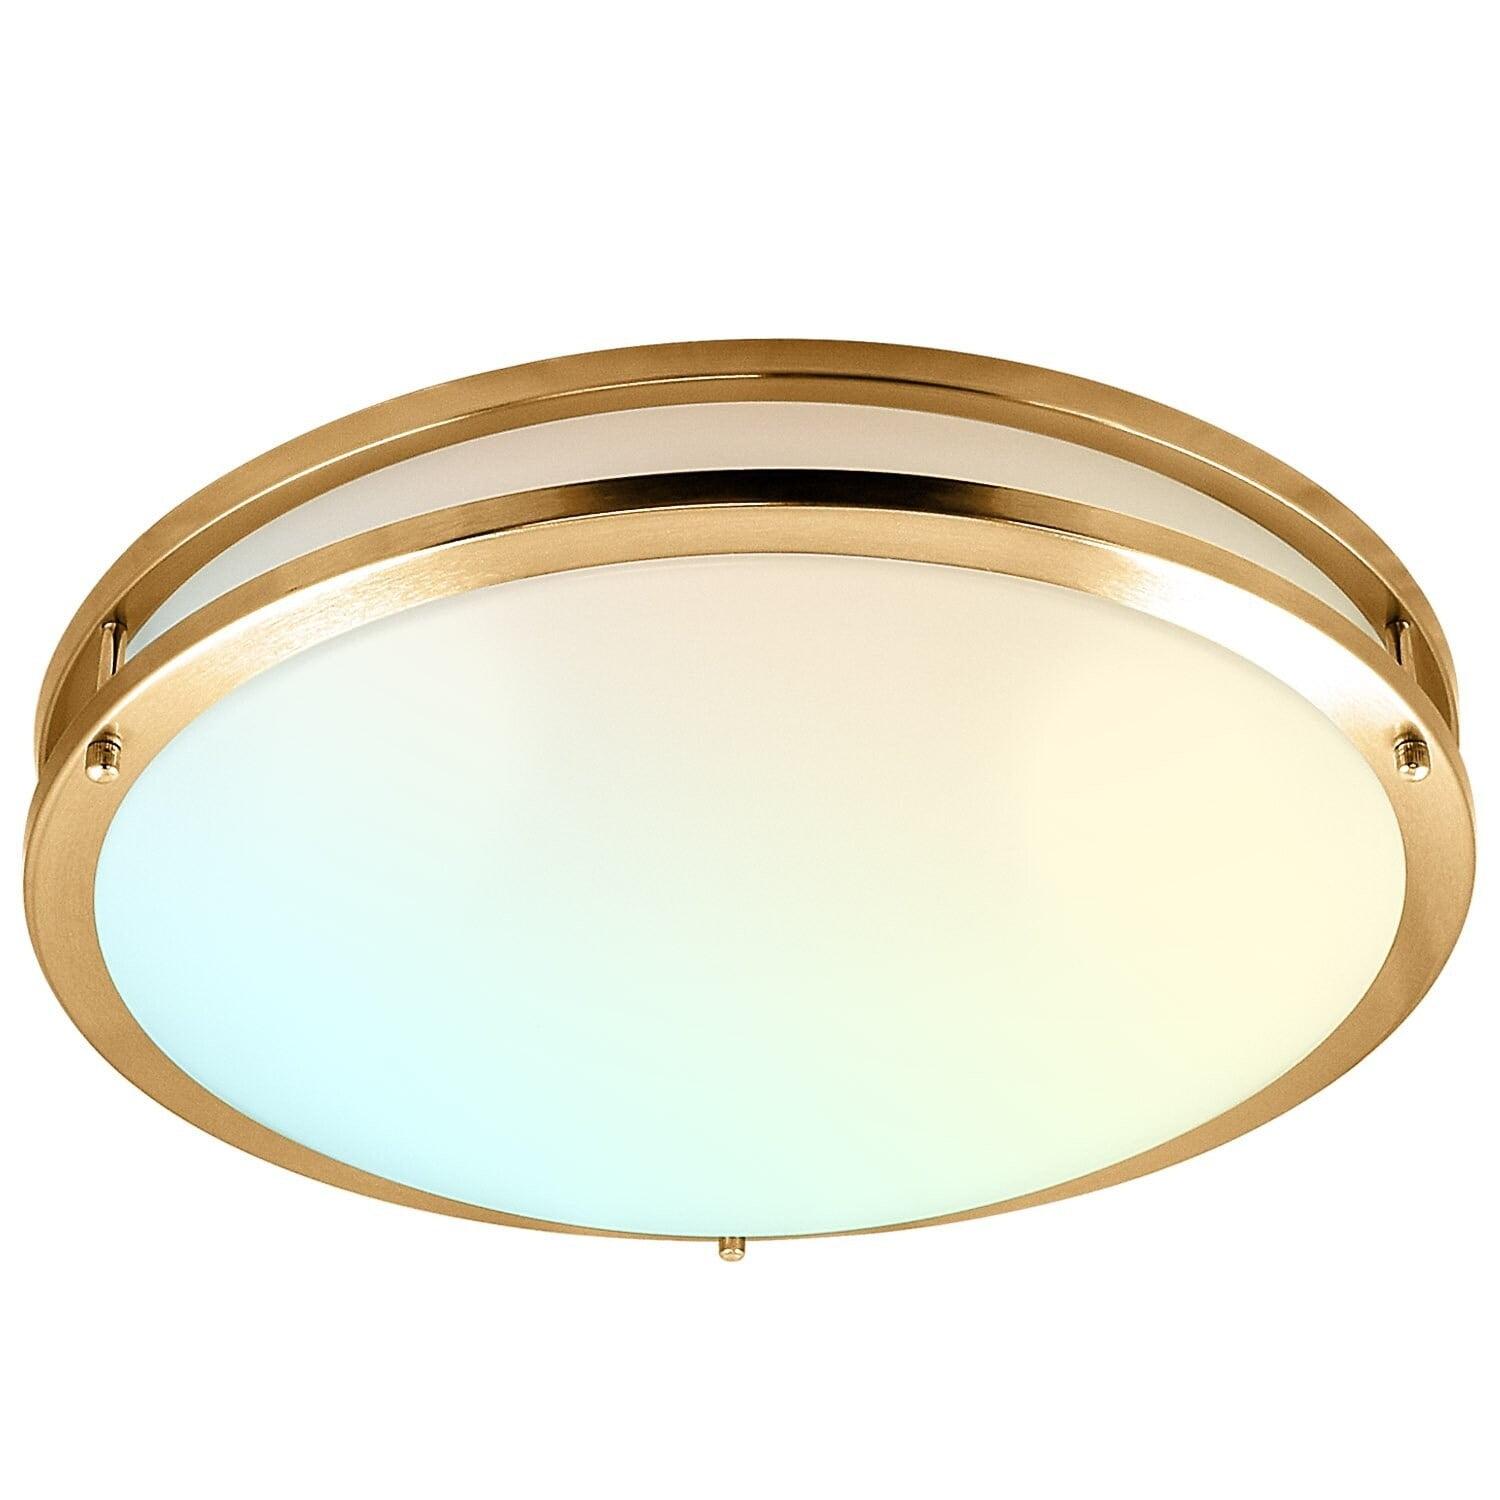 Elegant 18" Brushed Brass LED Ceiling Light with Color Select Feature